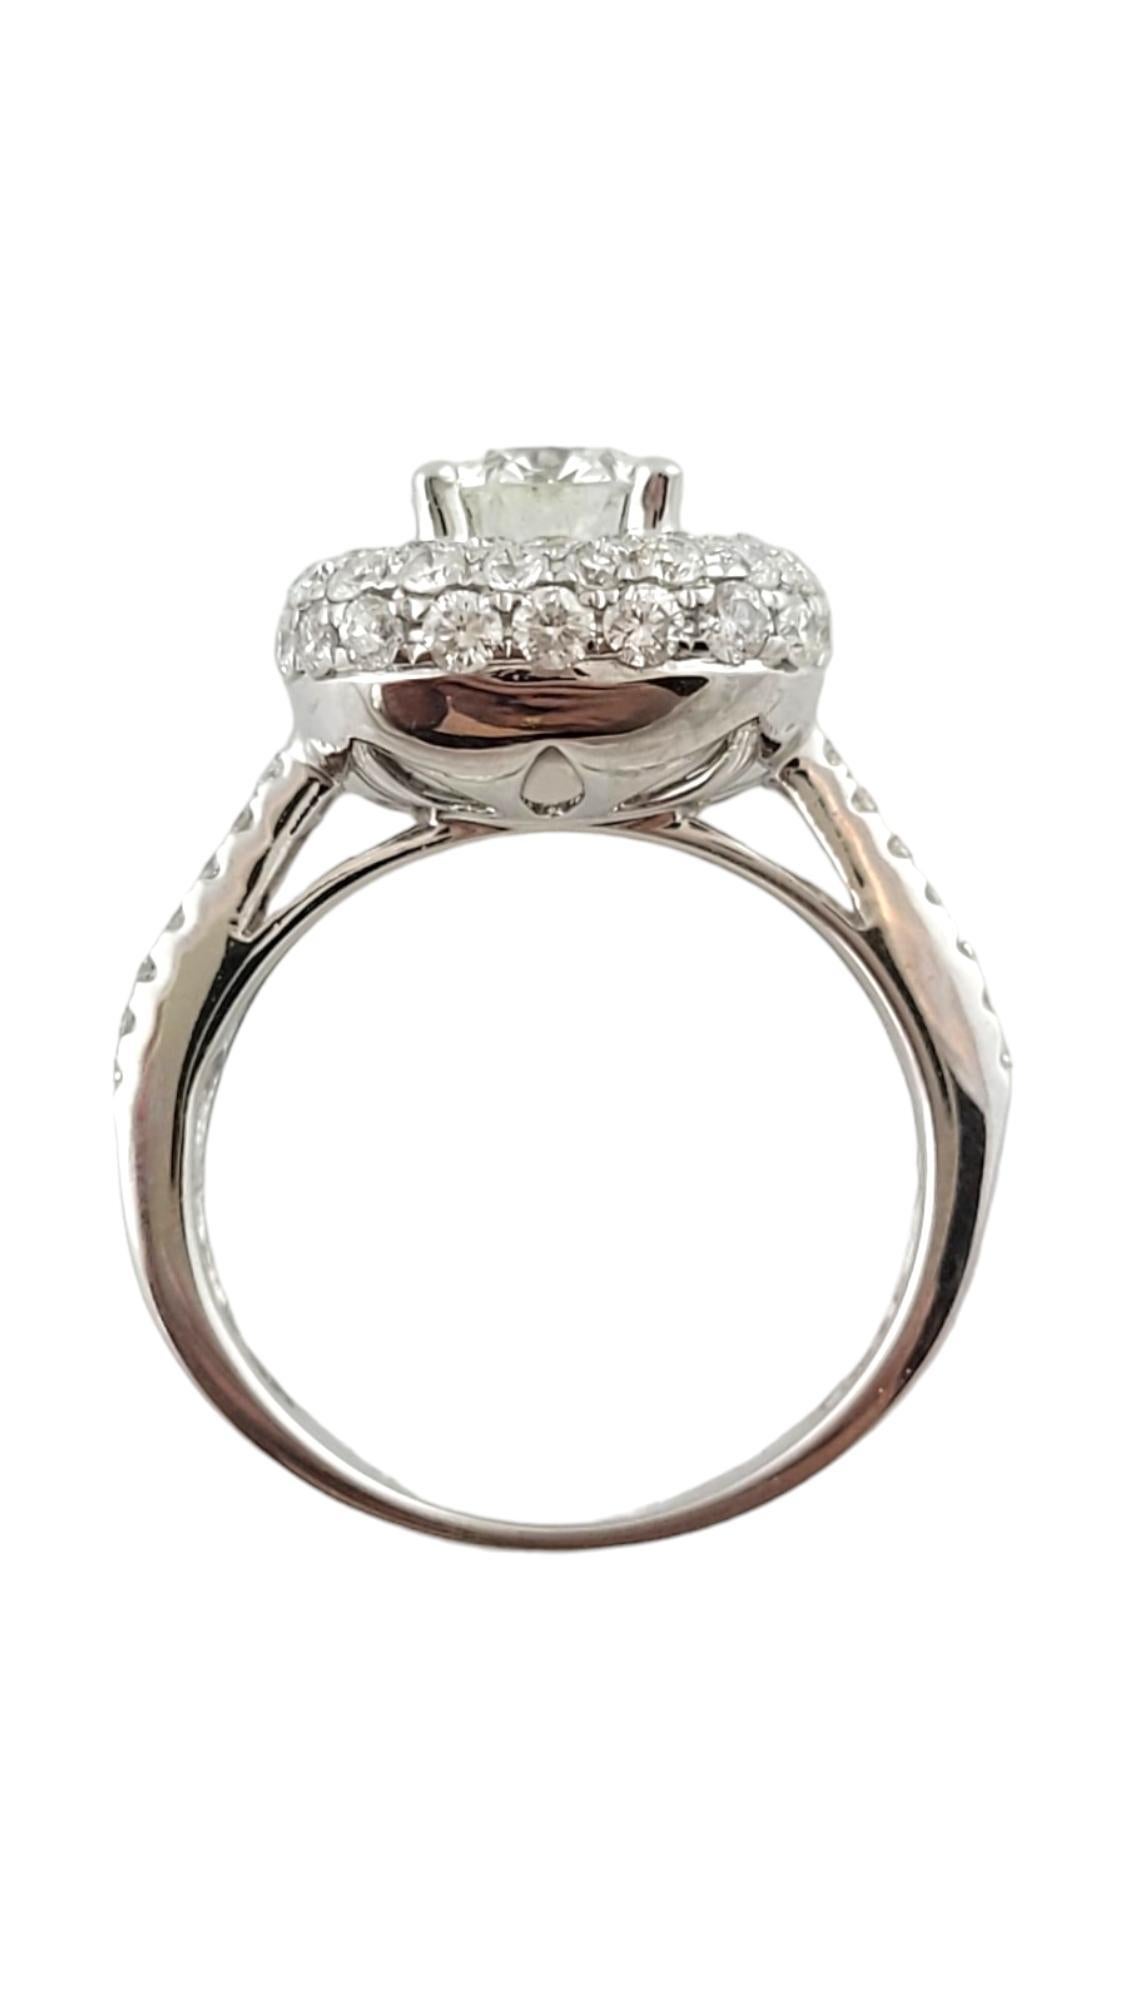 Princess Cut 14K White Gold Diamond Halo Engagement Ring 1.94cttw. Certified #16953 For Sale